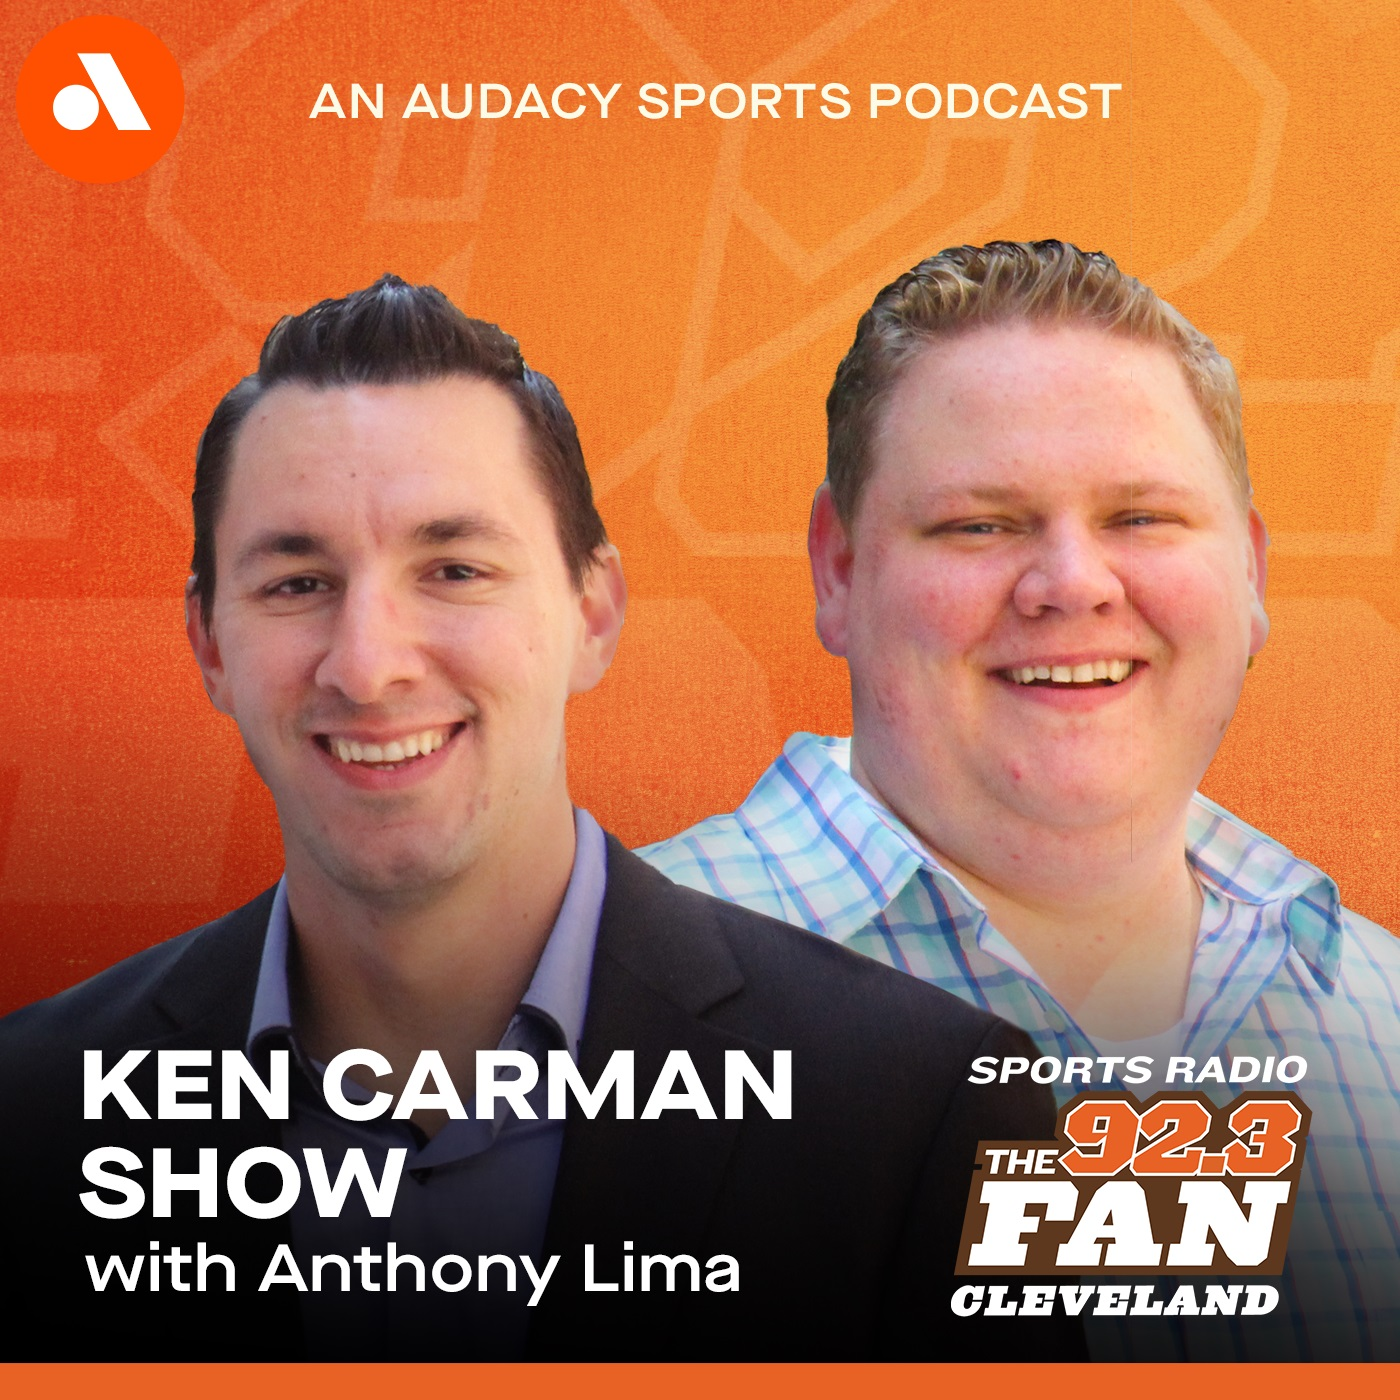 The Ken Carman Show with Anthony Lima react to the Rams and Bengals advancing to the Super Bowl